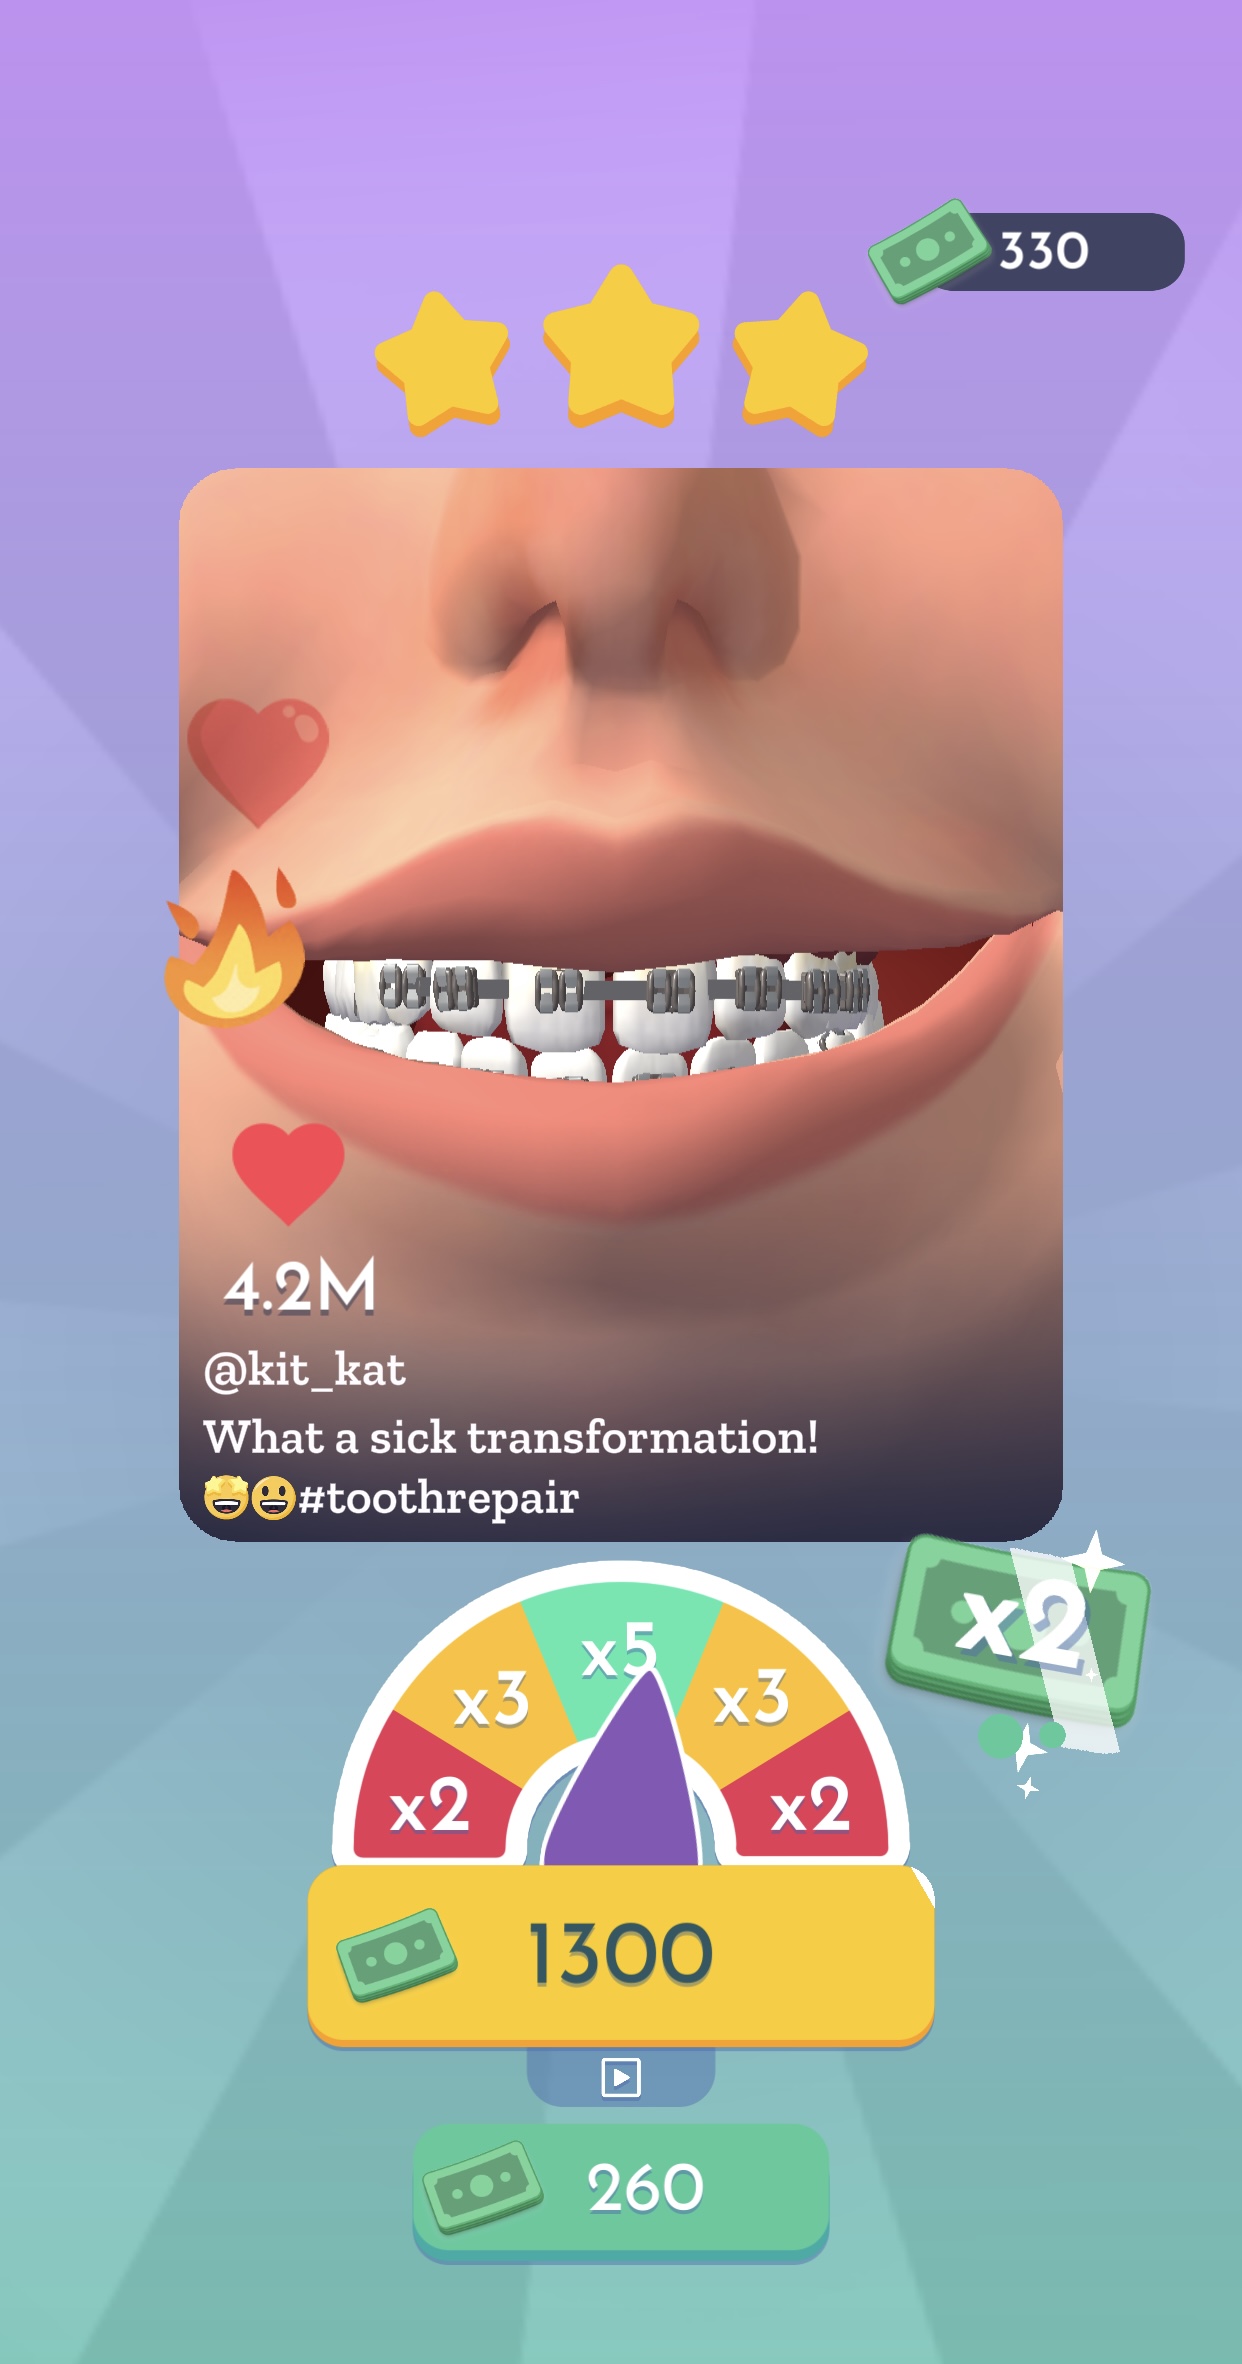 Perfect Smile Strategy Guide – Make Miles of Smiles With These Hints, Tips and Cheats